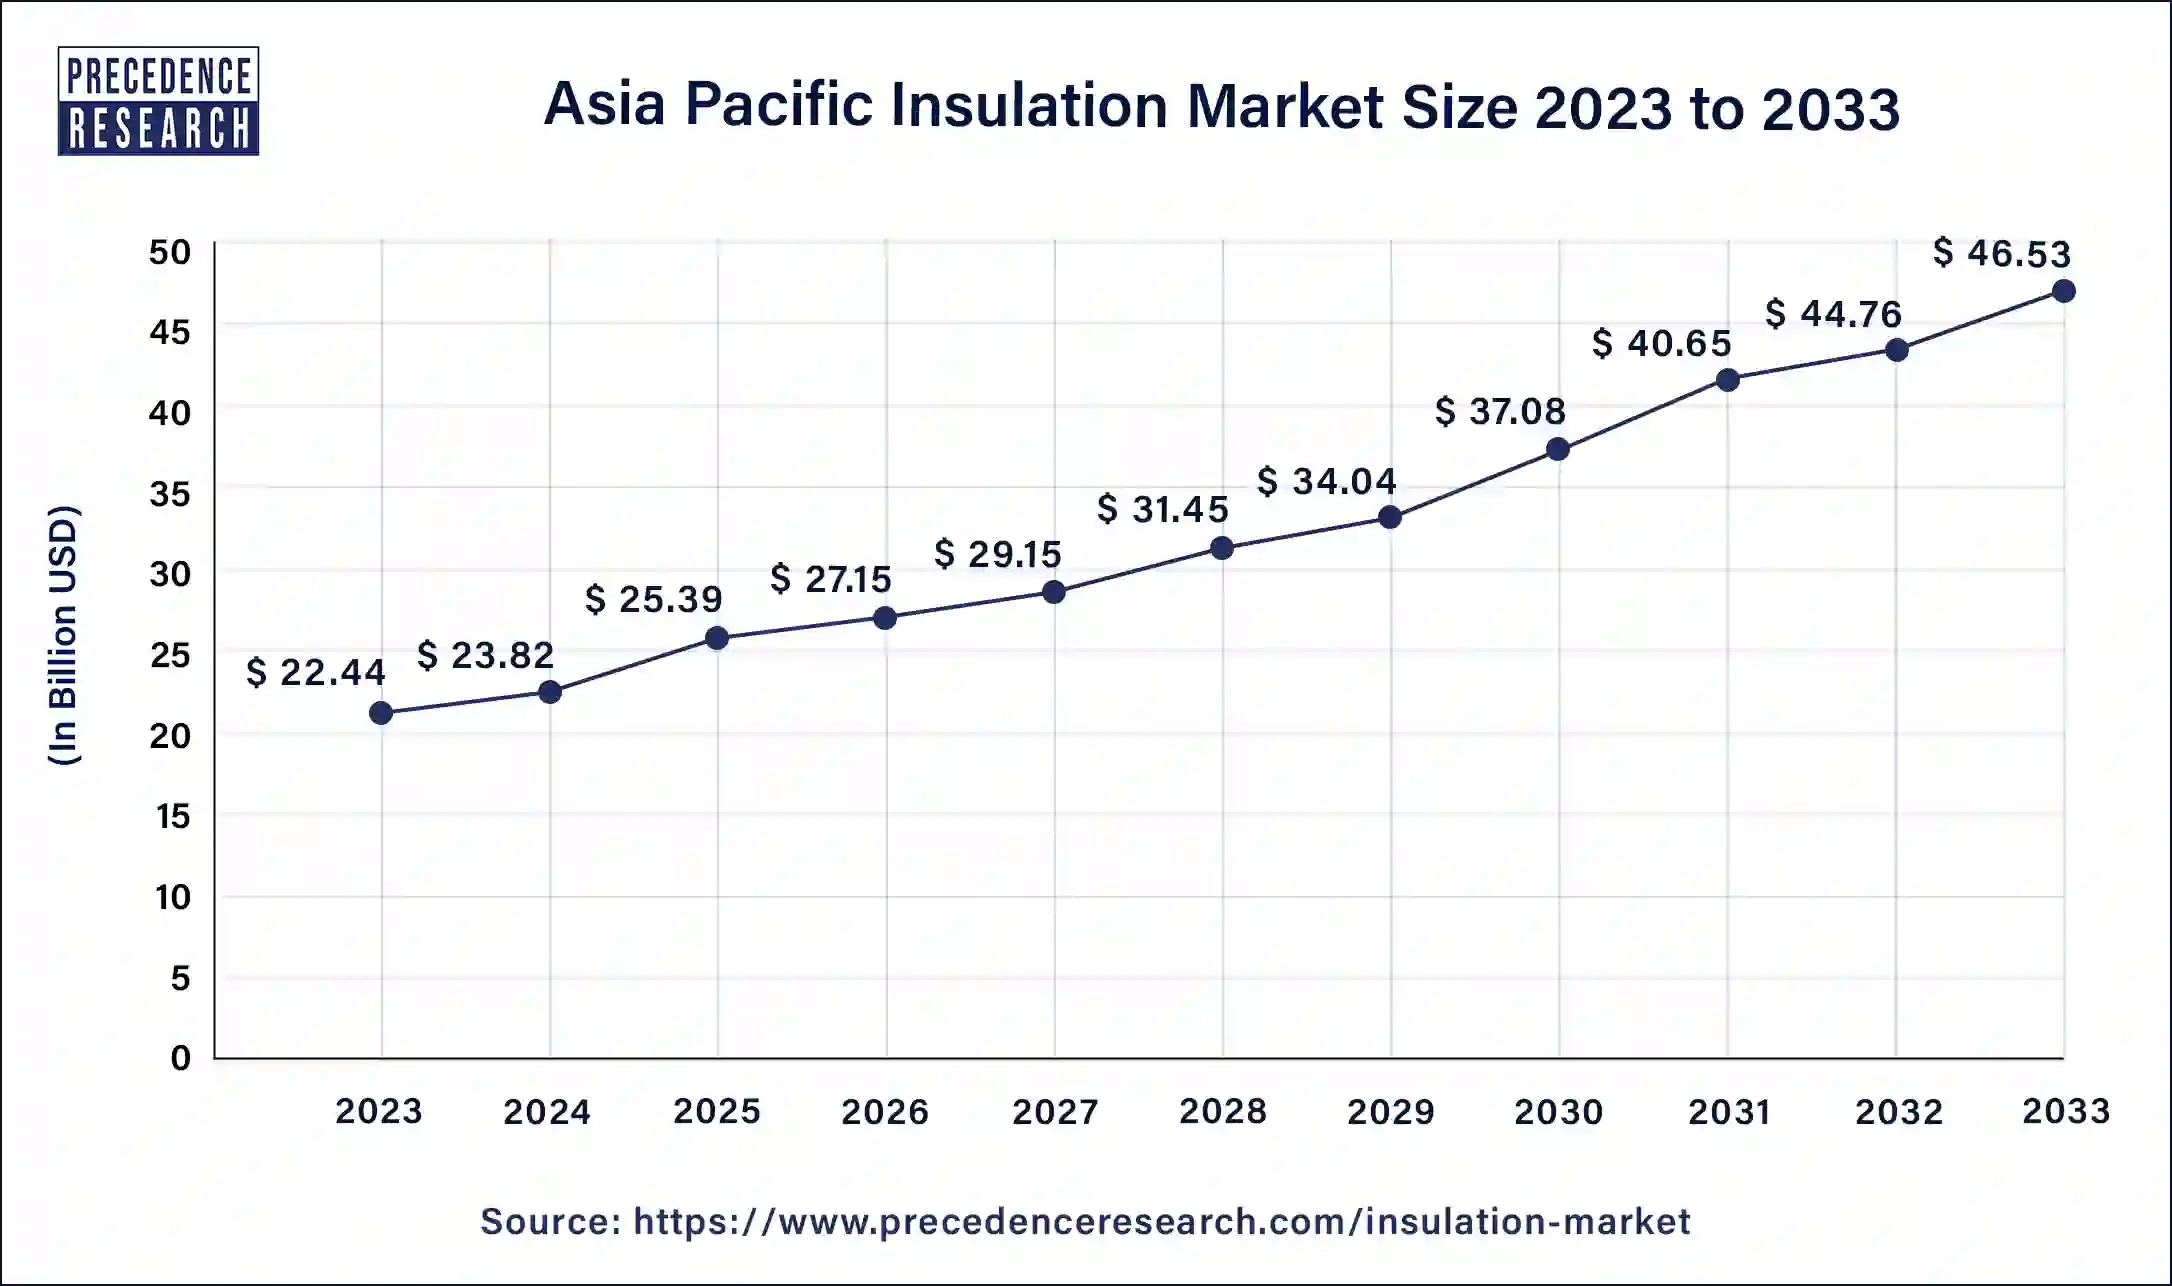 Asia Pacific Insulation Market Size 2024 to 2033